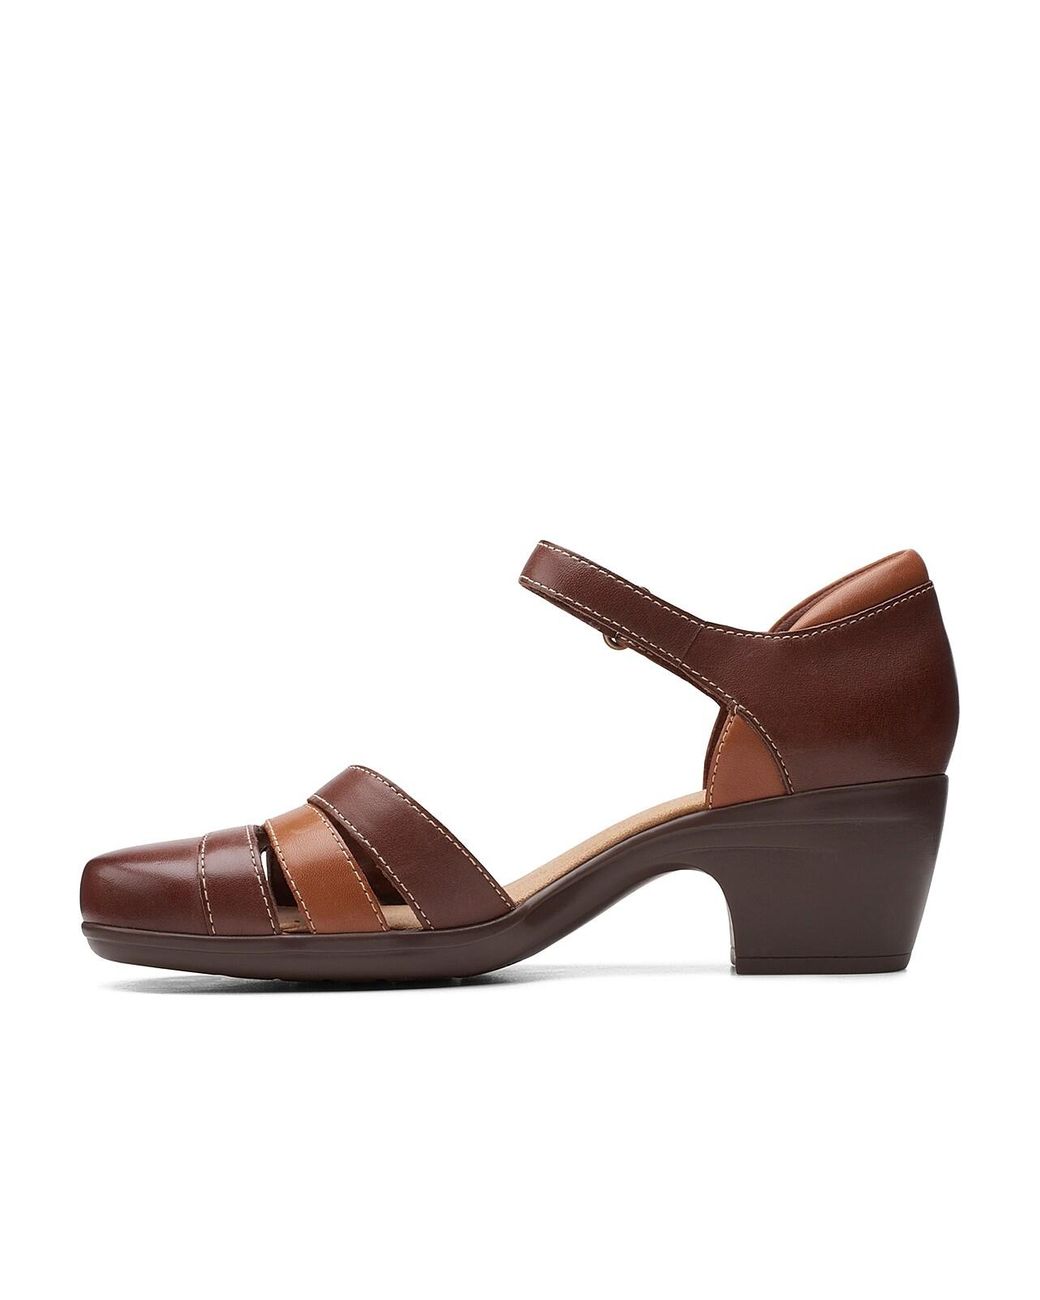 Clarks Emily Daisy Pump in Brown | Lyst